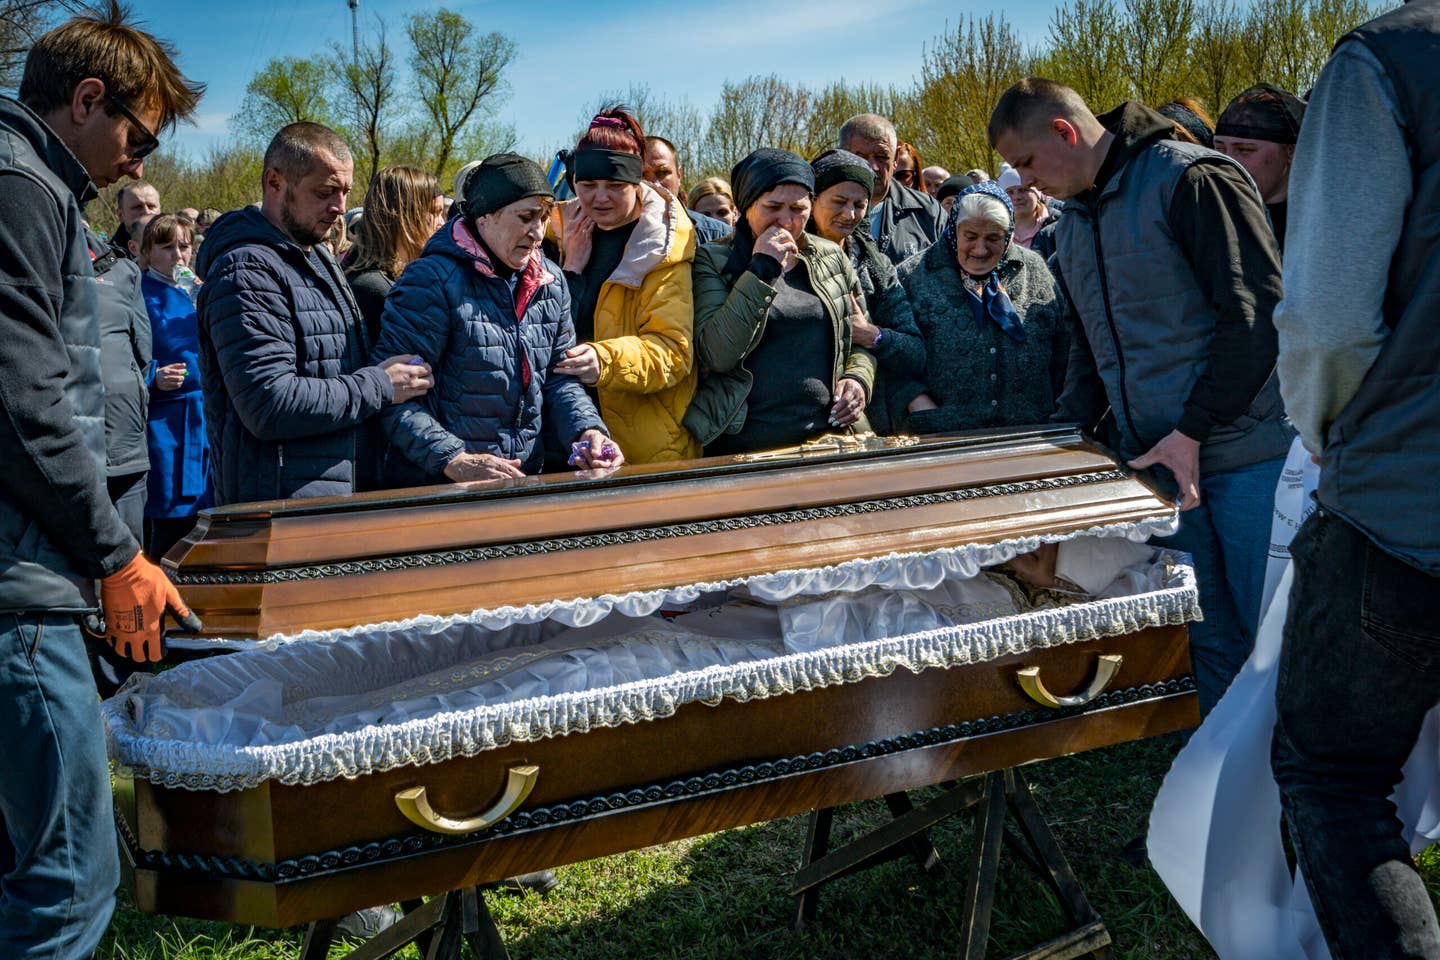 Family of Valentin Borisovych Matveyenko, a soldier killed in the Bakhmut on April 11, attends his burial in Velykyi Sambir cemetery, where he lived. (Photo by Celestino Arce/NurPhoto via Getty Images)